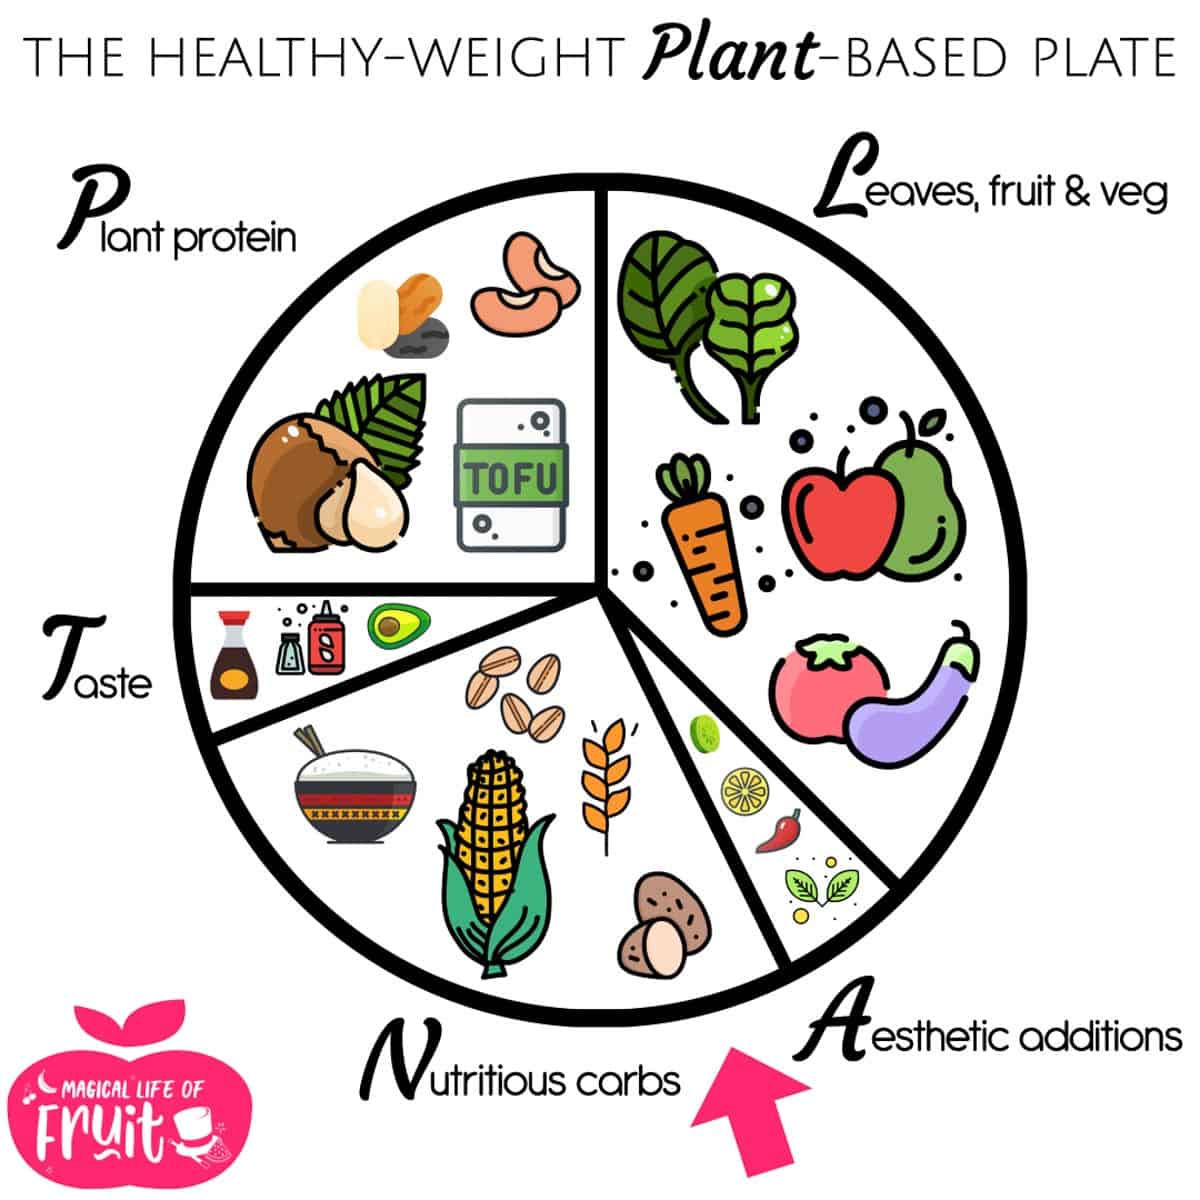 NUTRITIOUS CARBS The Healthy Weight Plant Based Plate